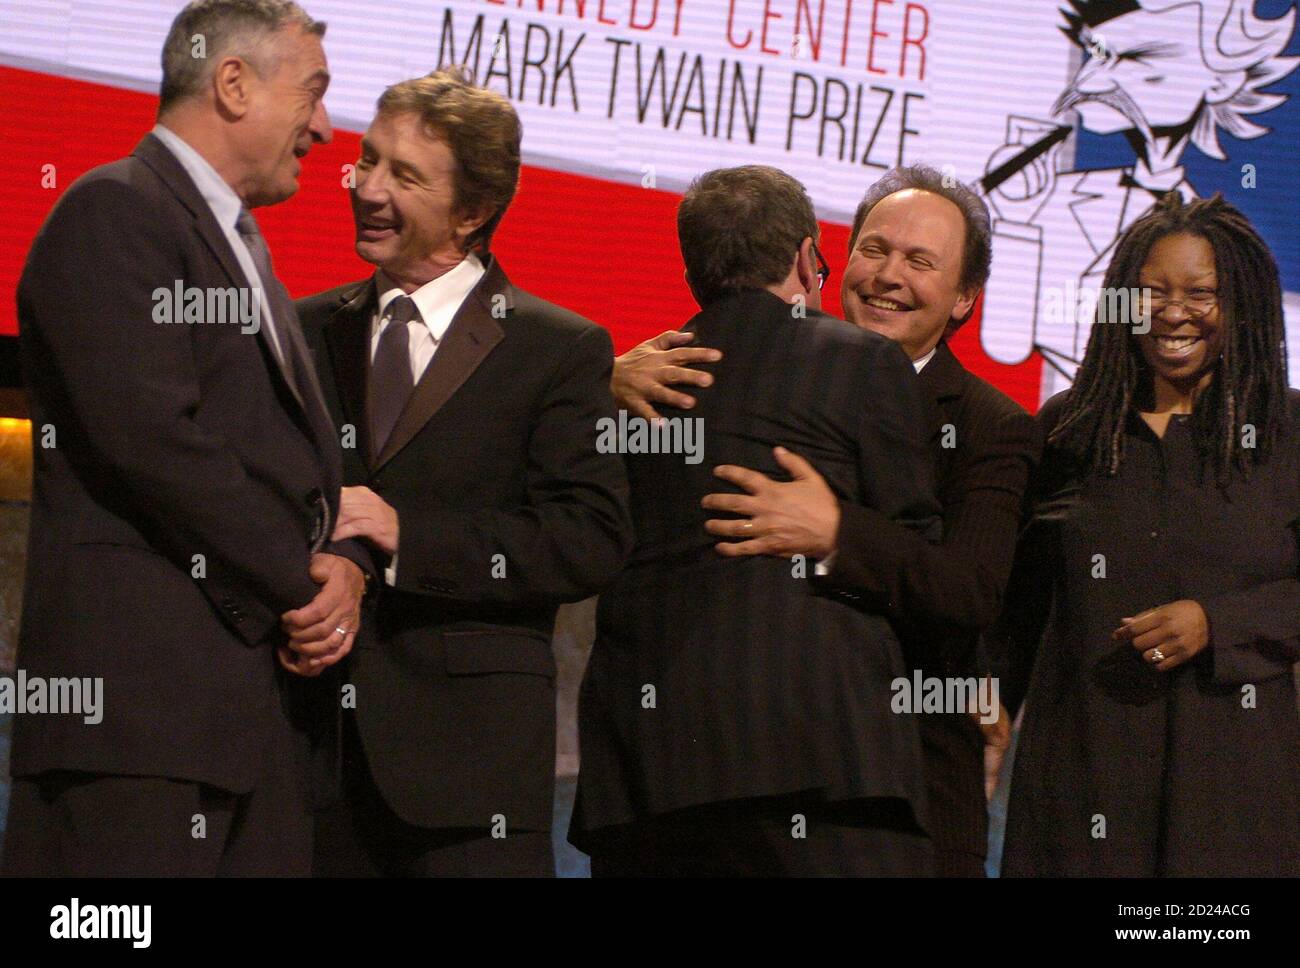 Actor and comedian Billy Crystal (2nd R) is hugged by fellow actor and  comedian Robin Williams as they are joined by actors Robert de Niro (L),  Martin Short (2nd L) and Whoopi